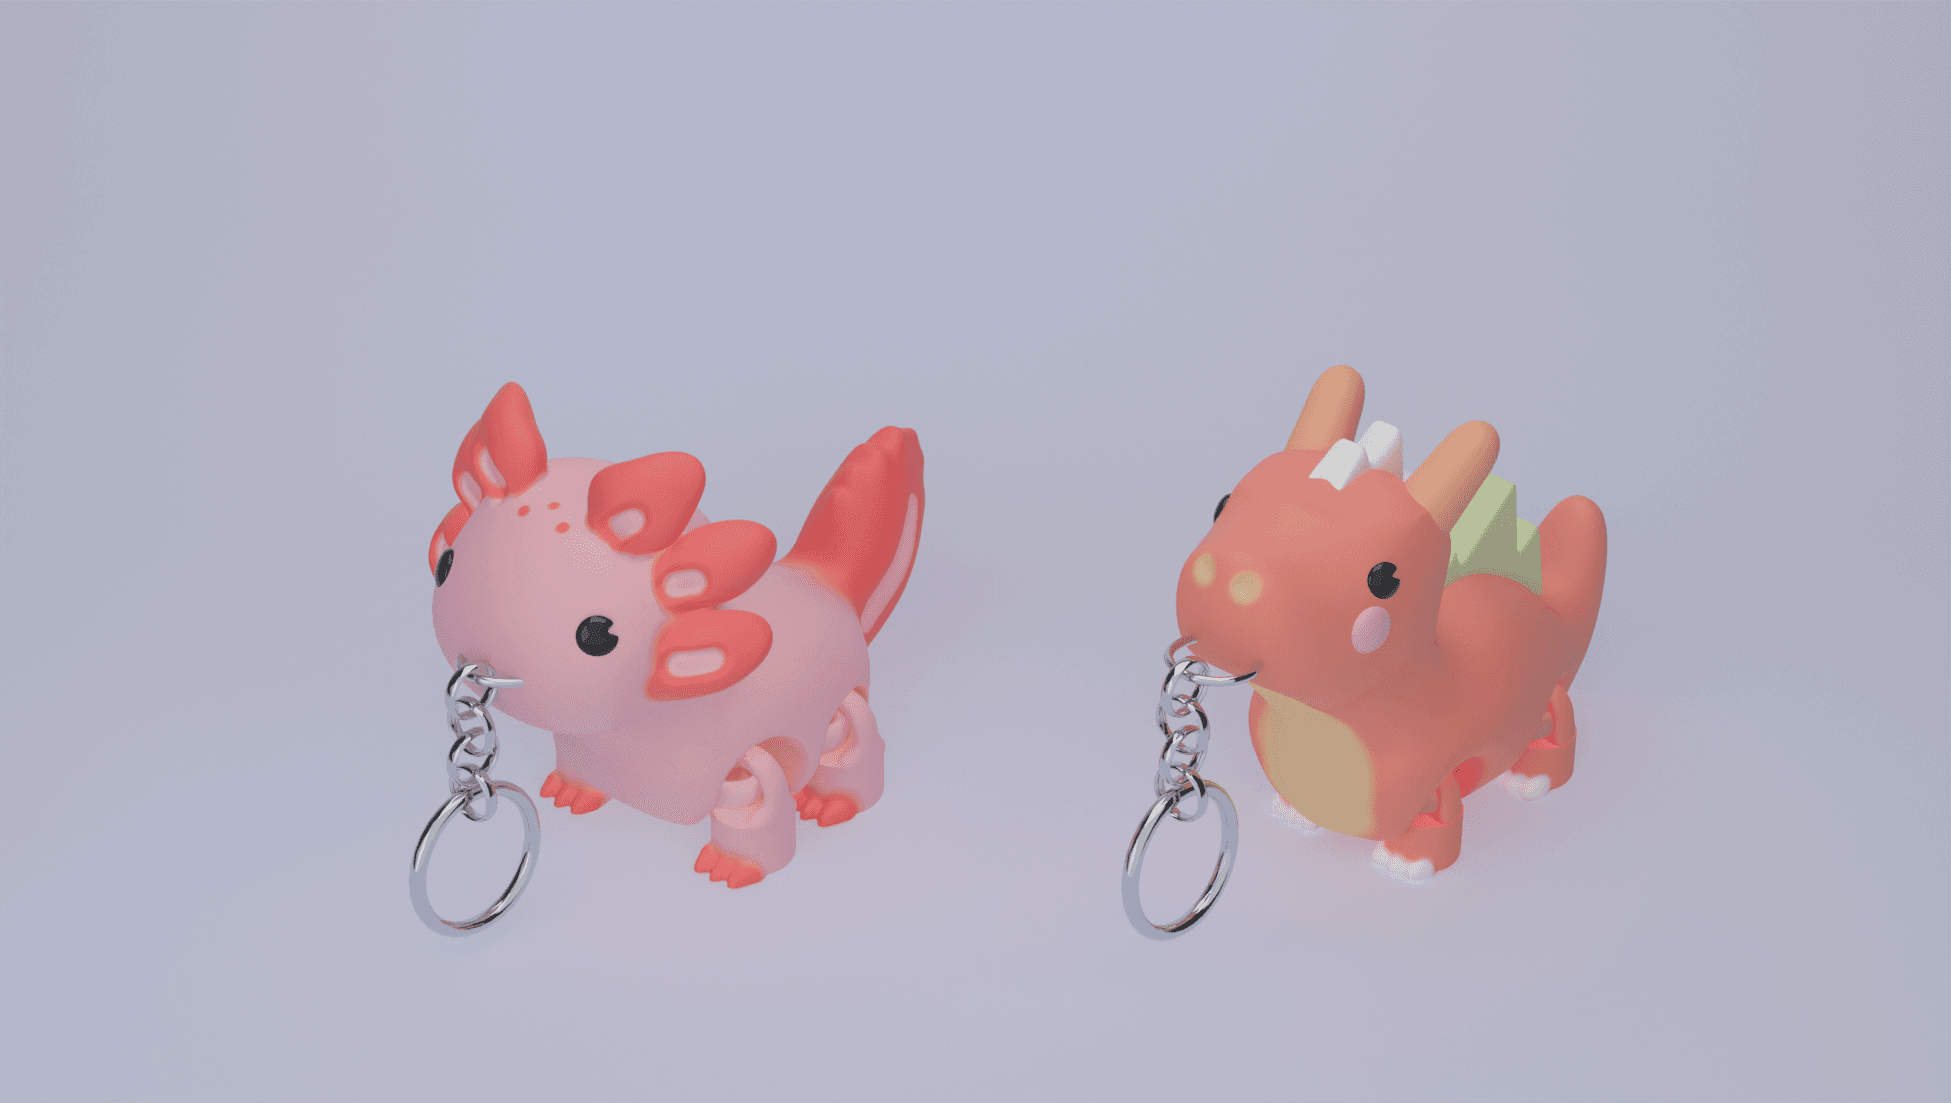 The exclusive Patreon Keychain Flexi model for May is on its way!